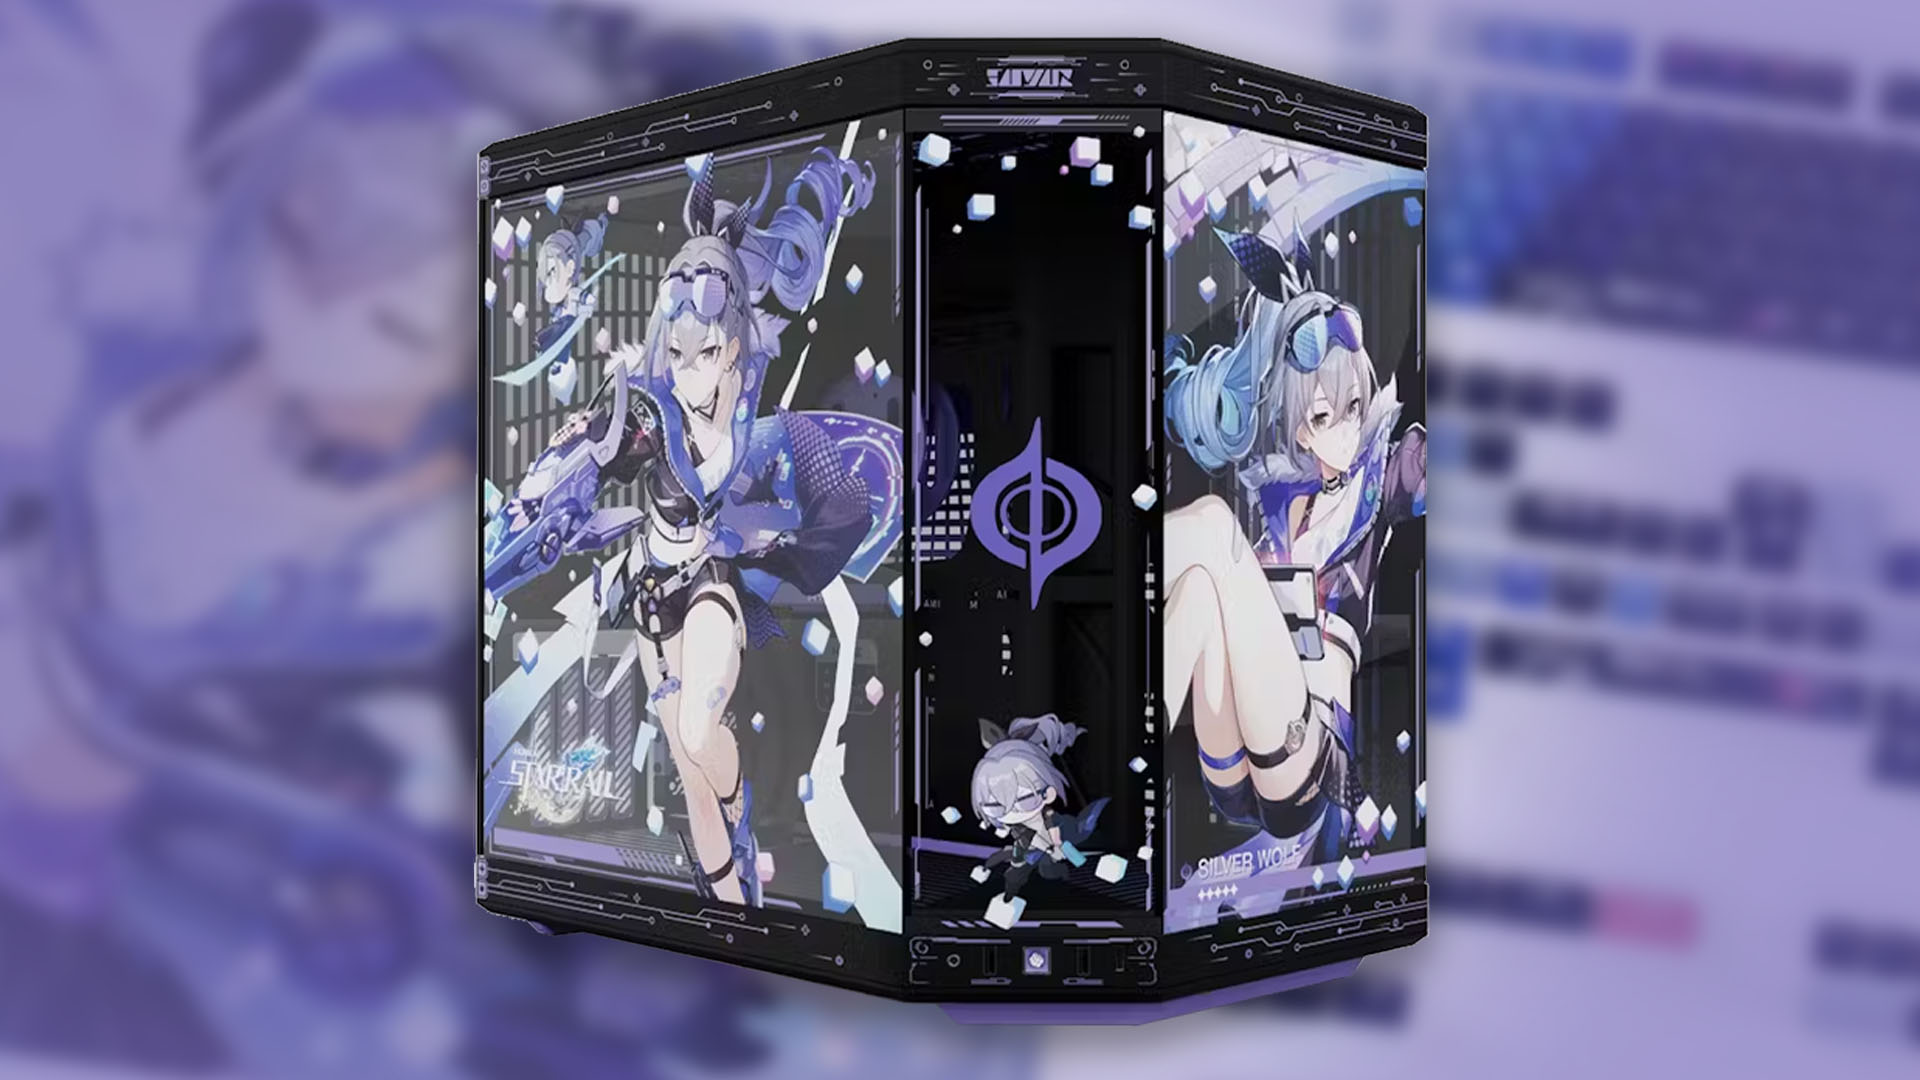 The perfect Honkai Star Rail PC case just landed, if you act fast